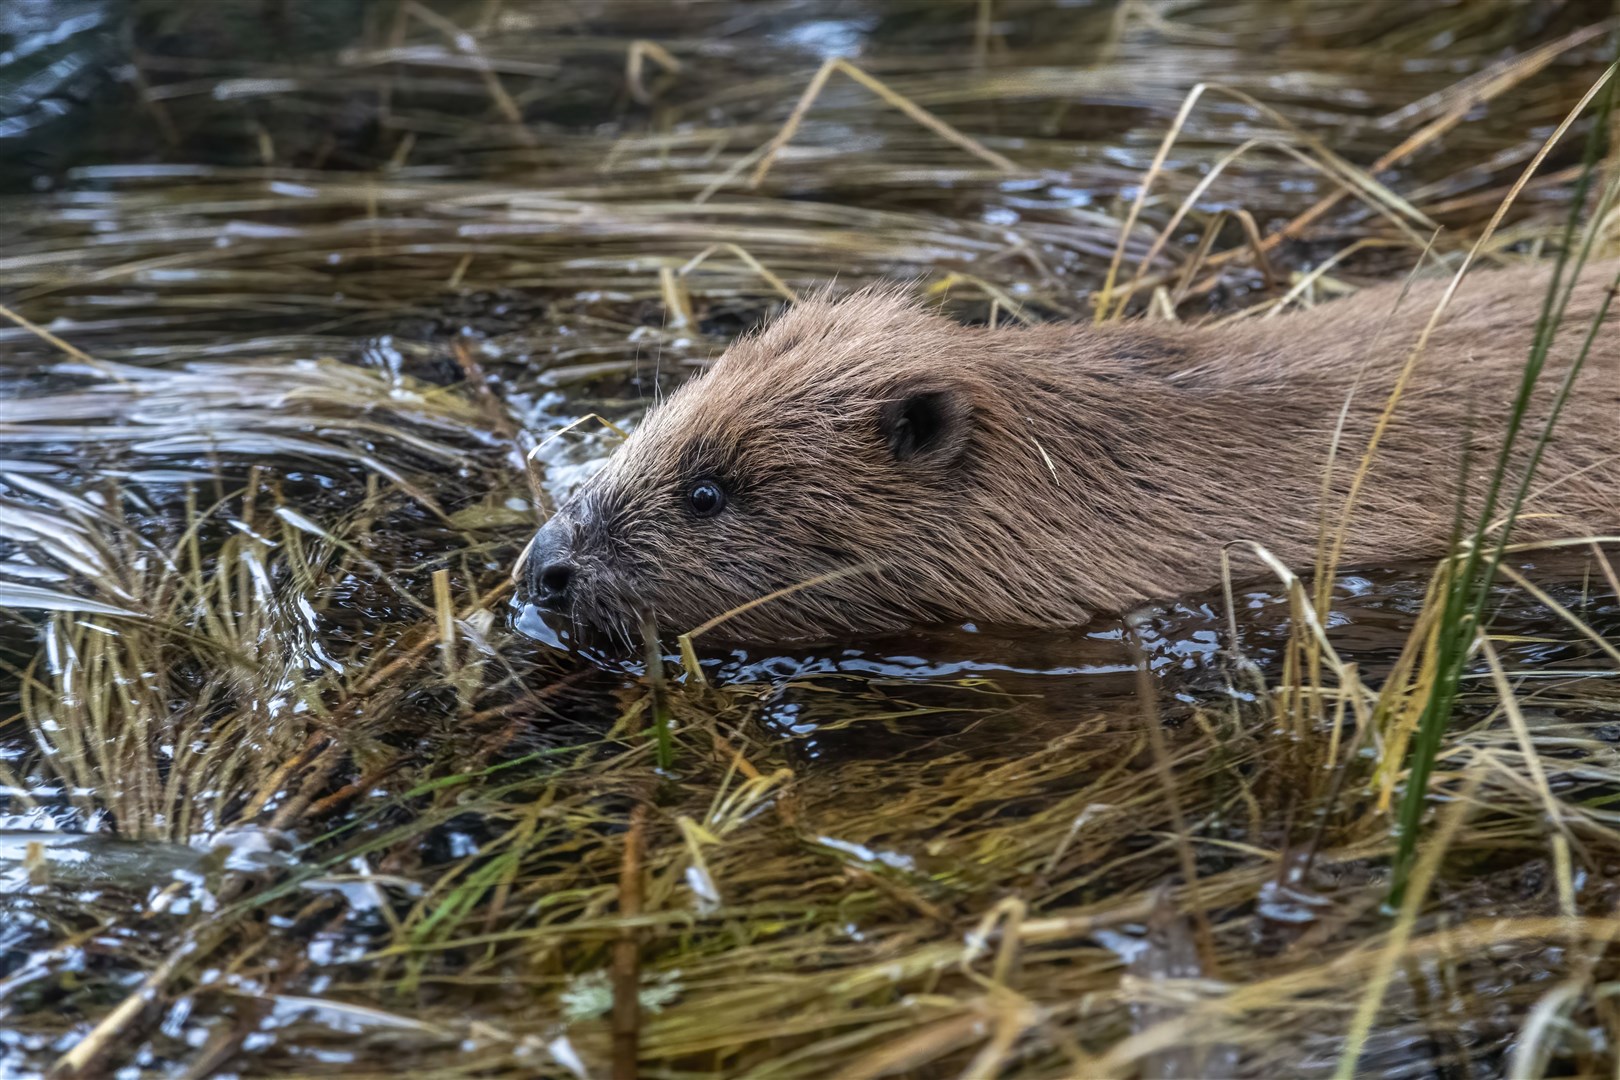 Exploring their new home. Picture: Elliot McCandless, Beaver Trust.